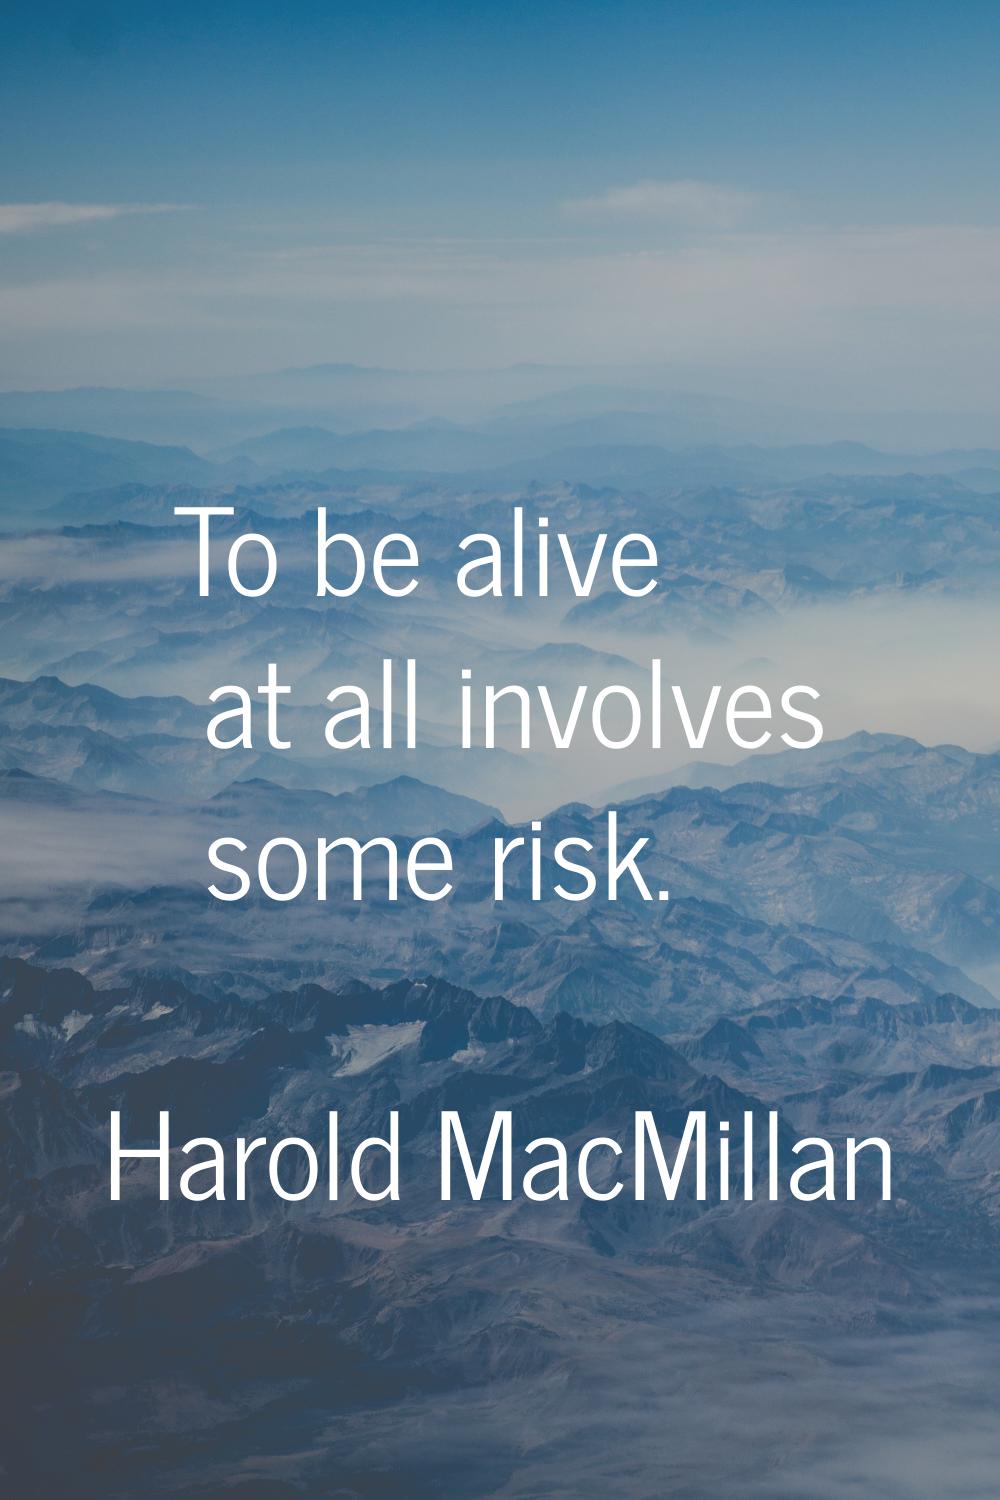 To be alive at all involves some risk.